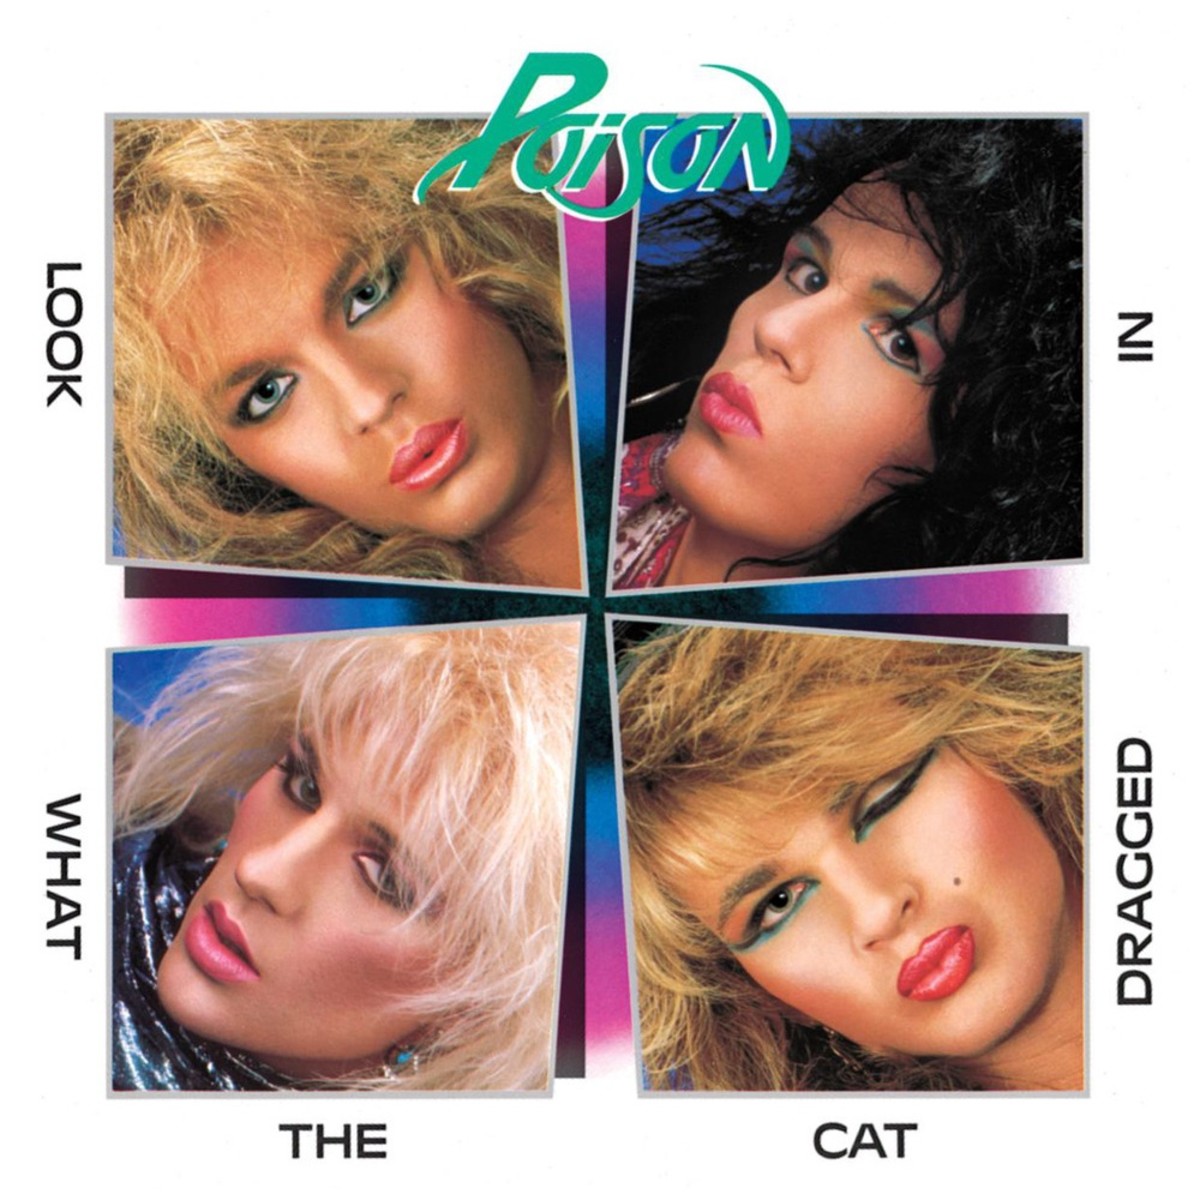 Poison - Cat Dragged In album cover